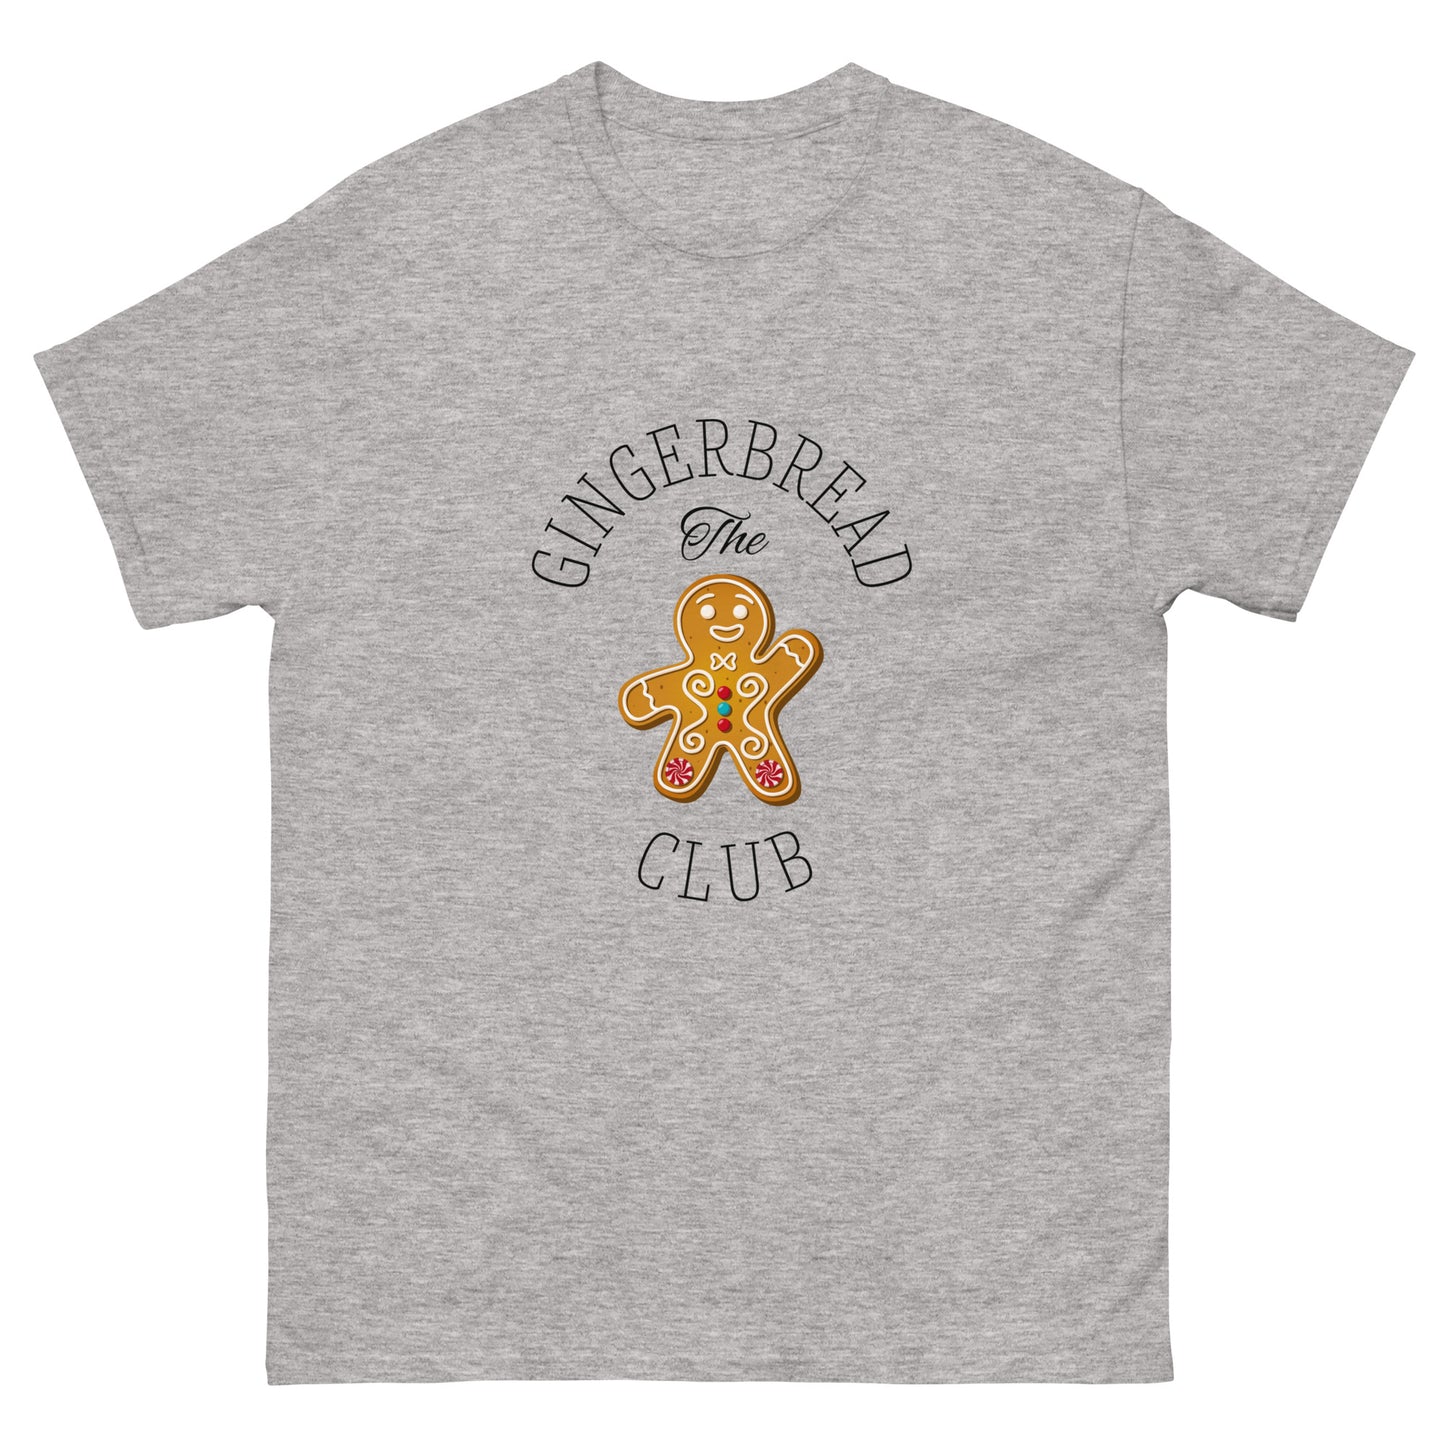 The Gingerbread Club - Men's classic tee (Sizes: S-5XL) Grey/White ~ Sharon Dawn Collection (Sale Price: $44.20 CAD)